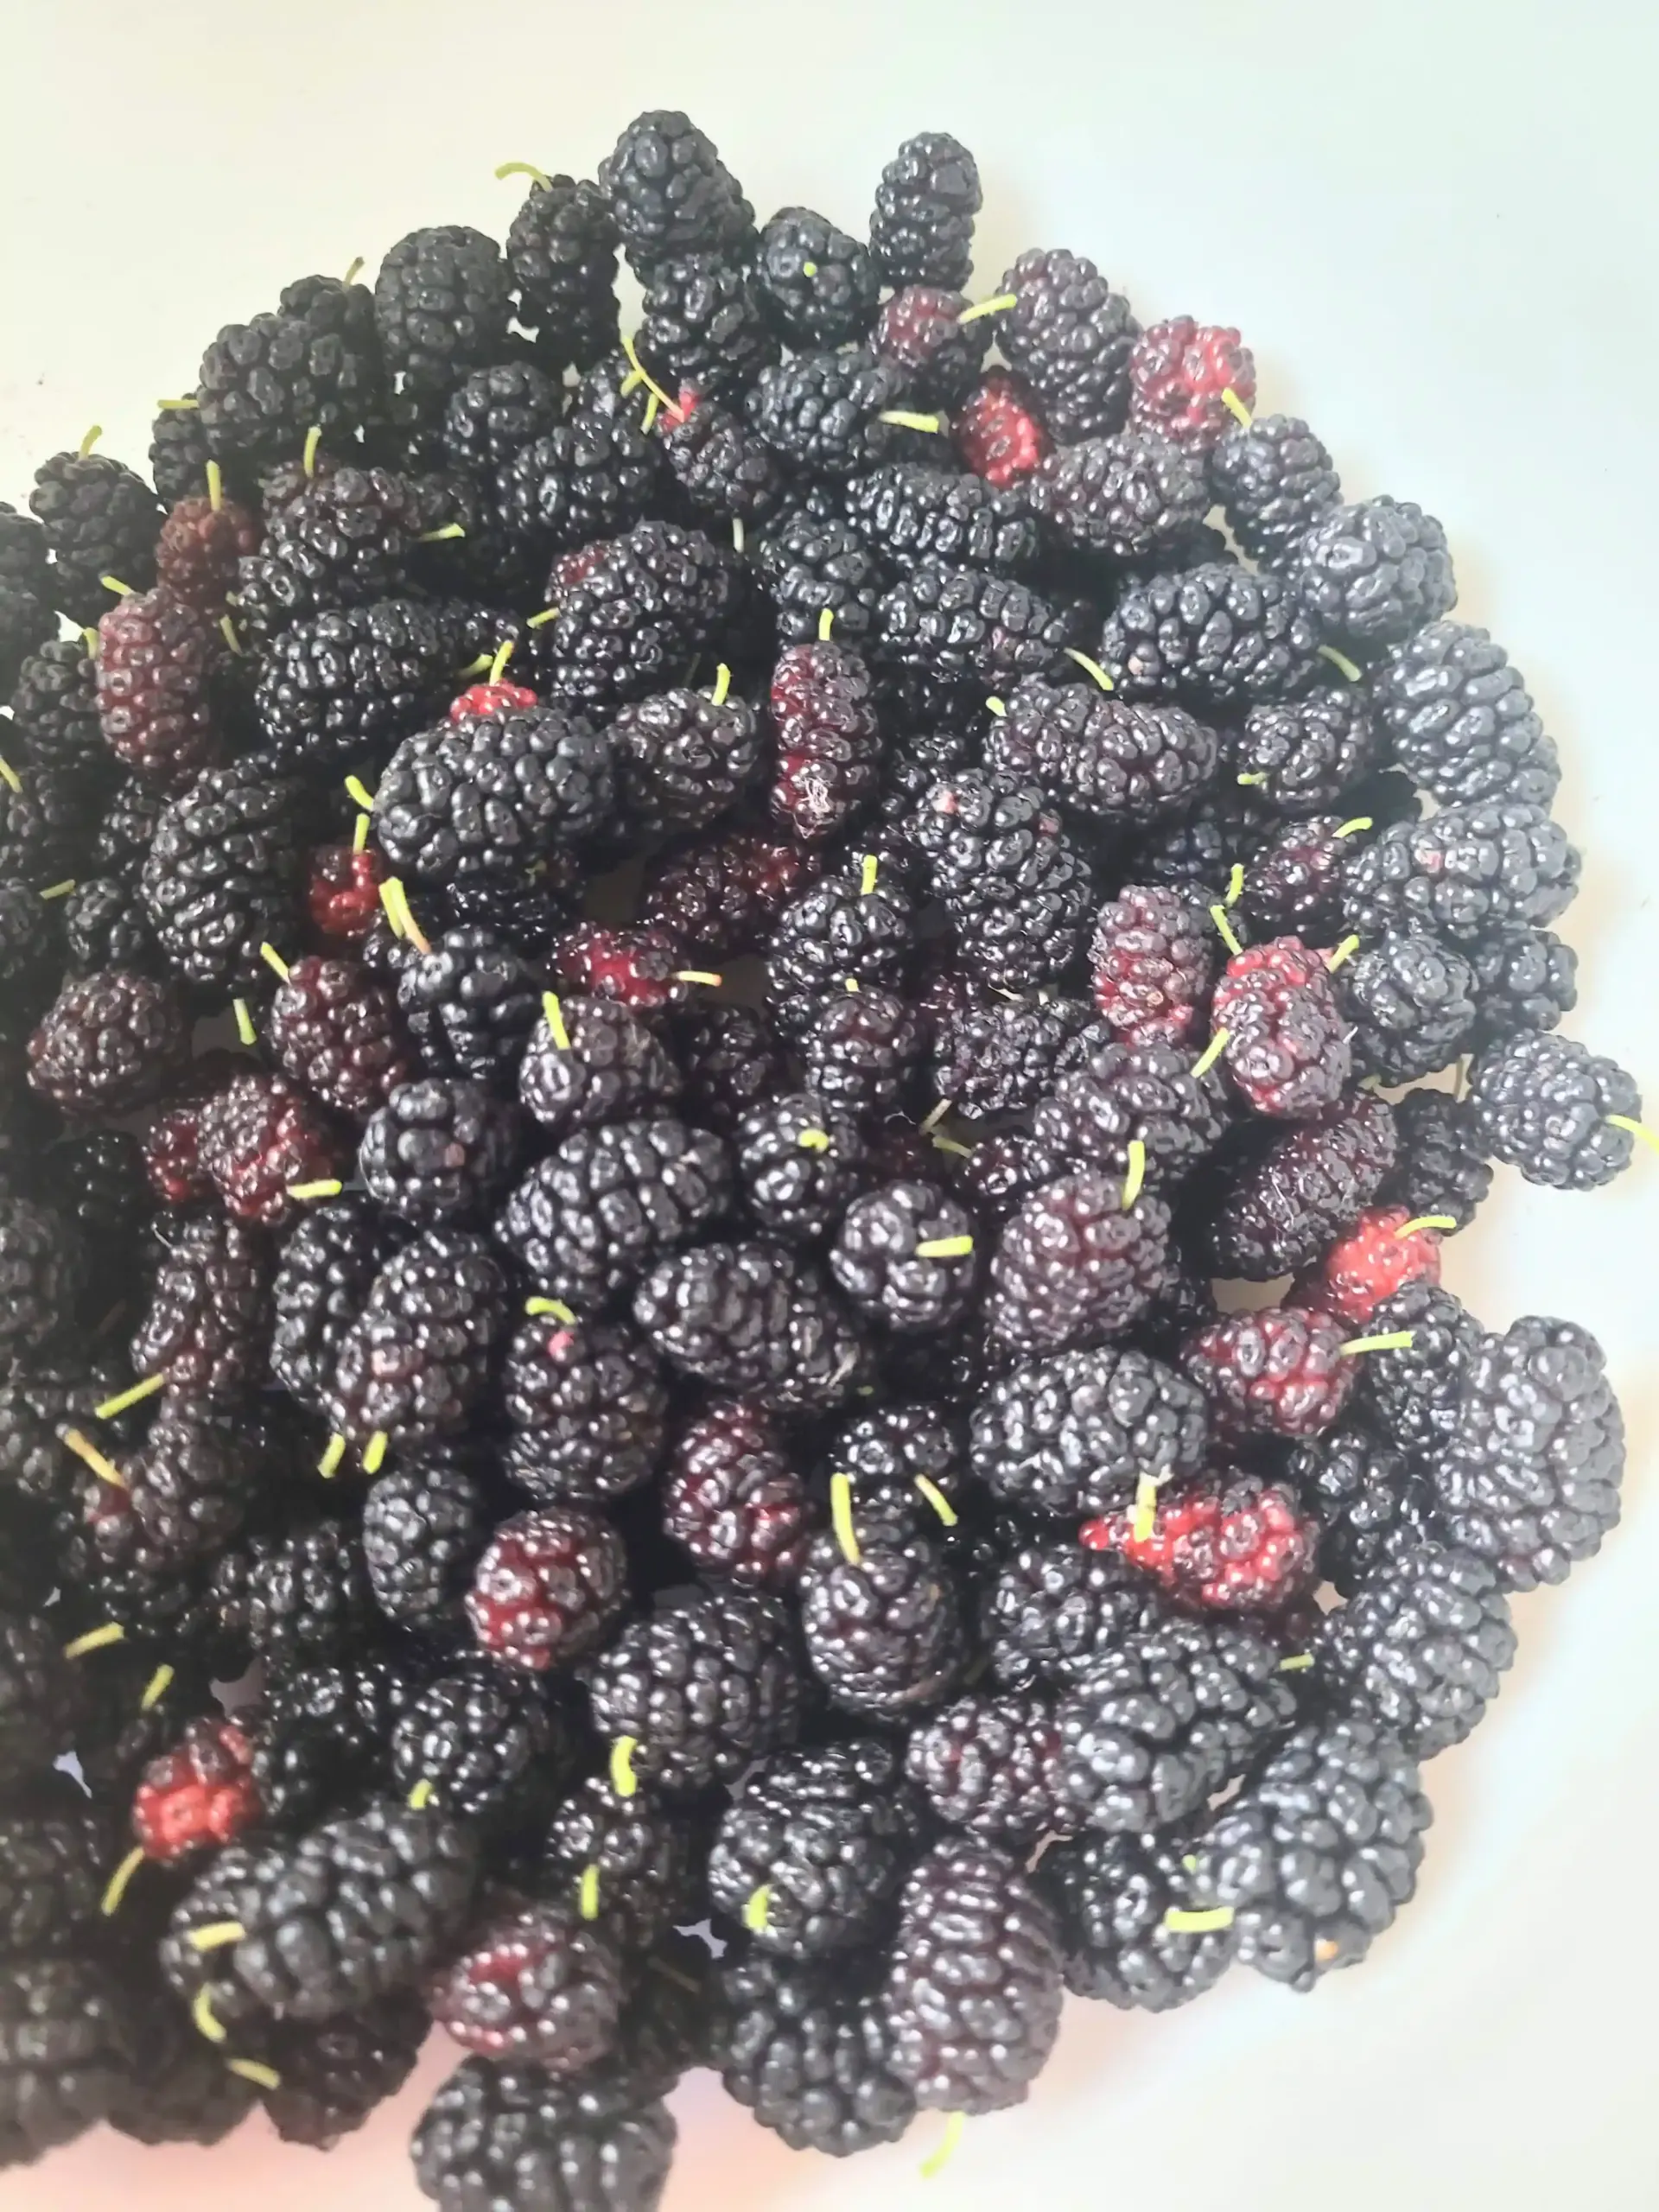 mulberries in a white bowl.